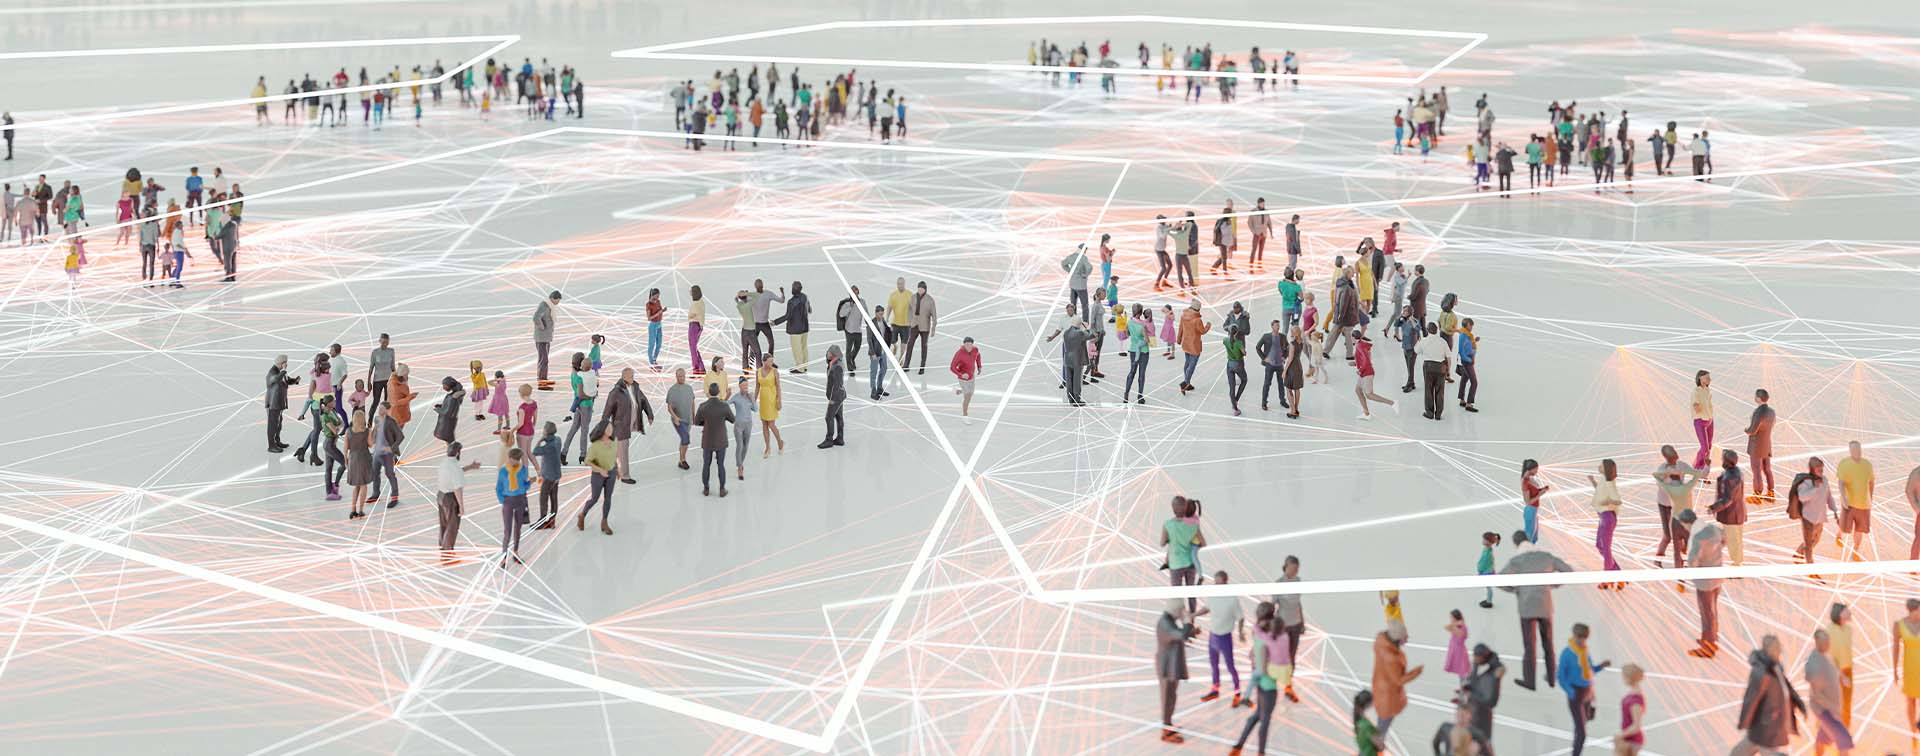 Aerial view of people standing spread out in groups across a patterned floor